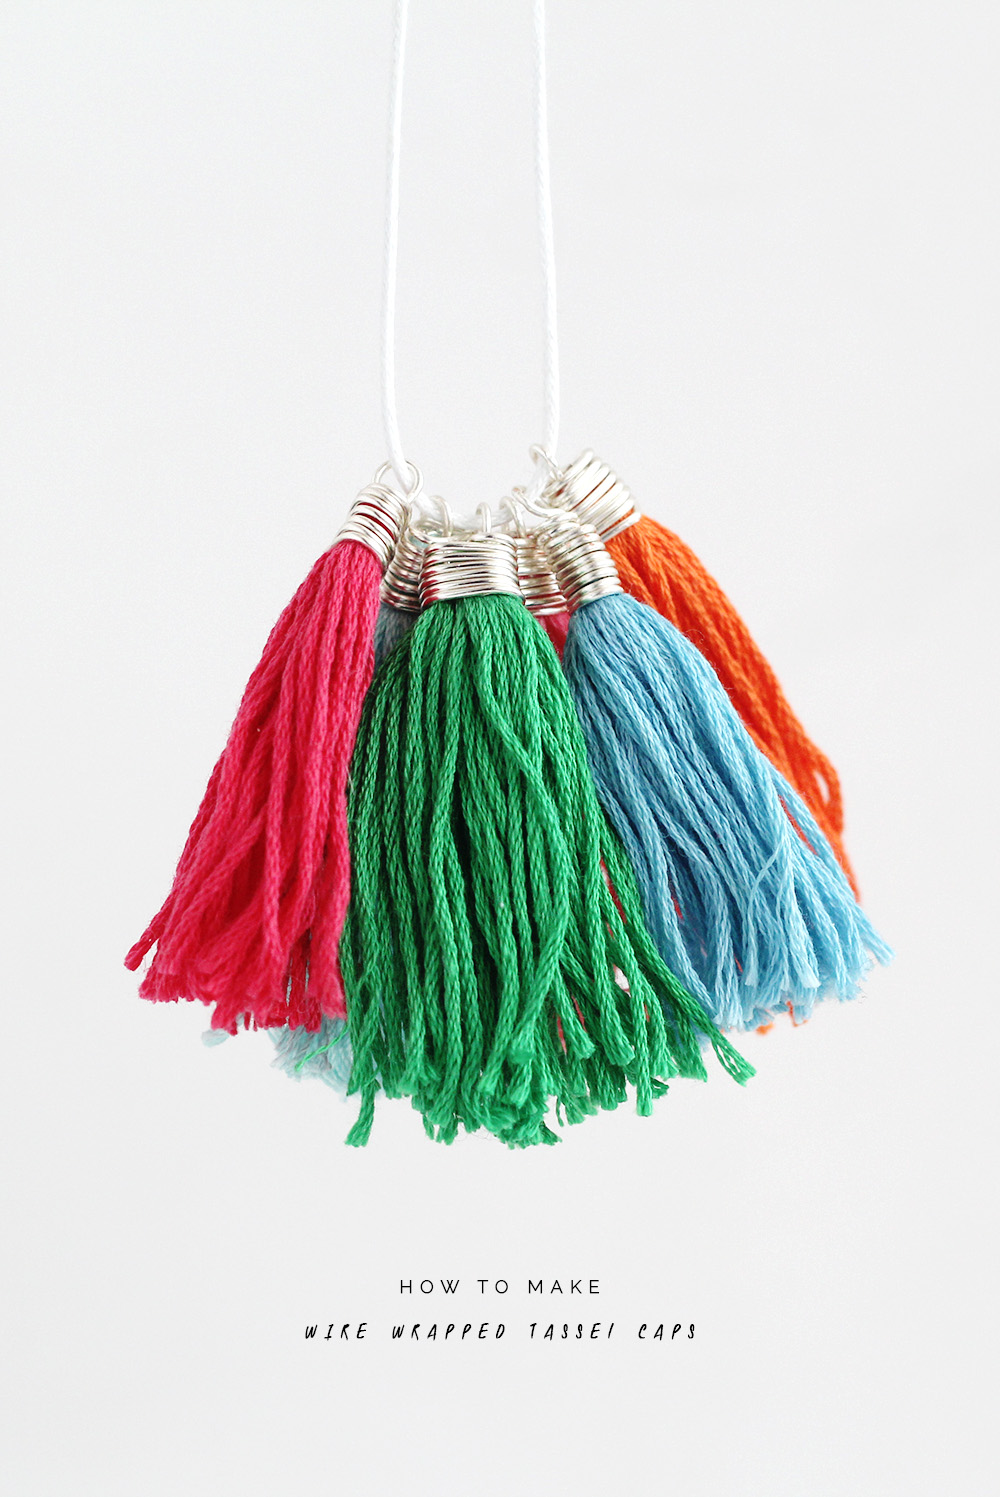 Making Tassels With The Cricut 